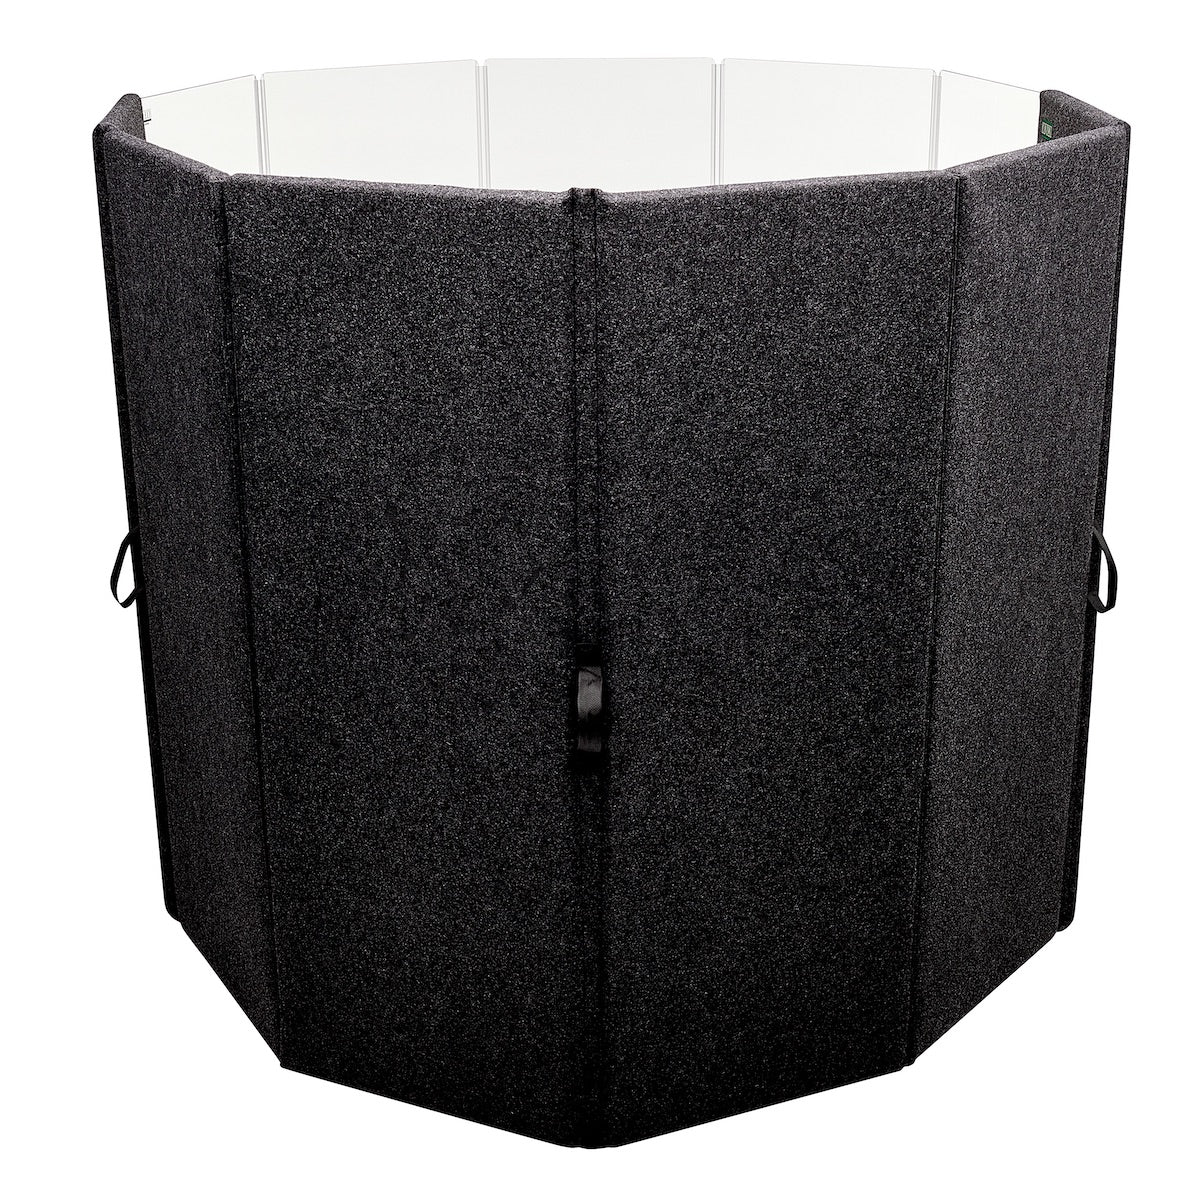 ClearSonic IPC - IsoPac C Drum Isolation Booth, rear